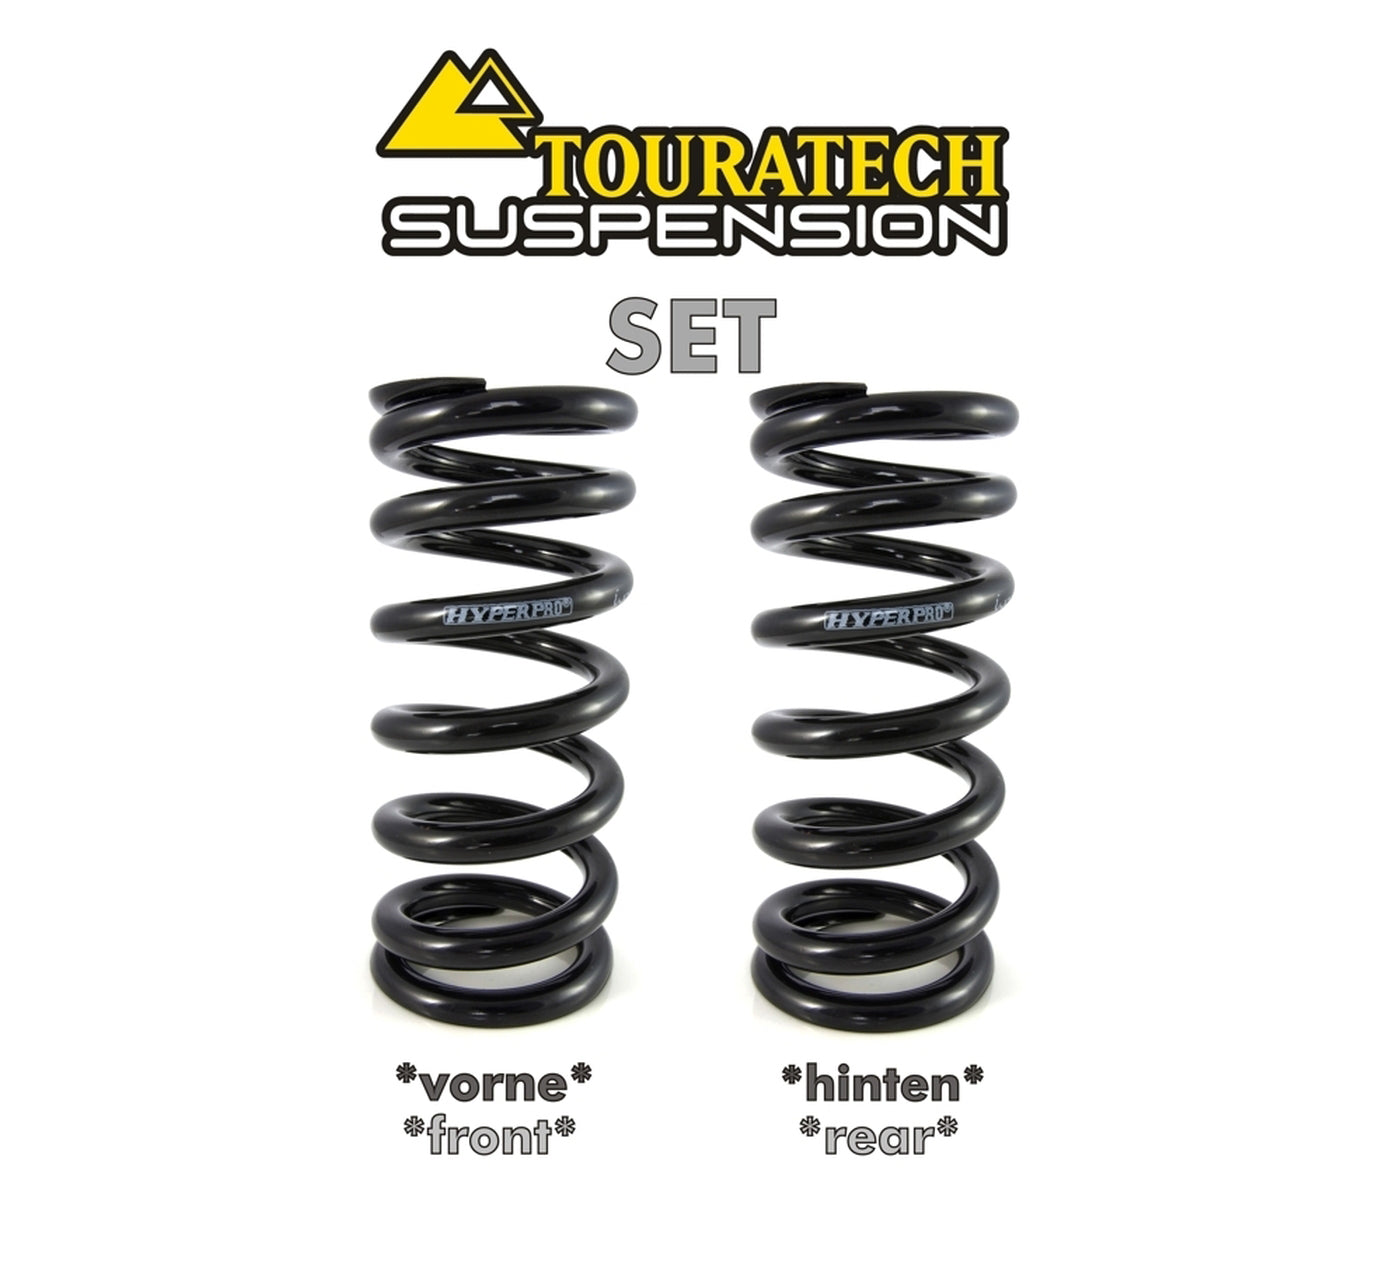 Touratech Suspension progressive replacement springs for BMW K 1200 GT ESA 2005 - 2008